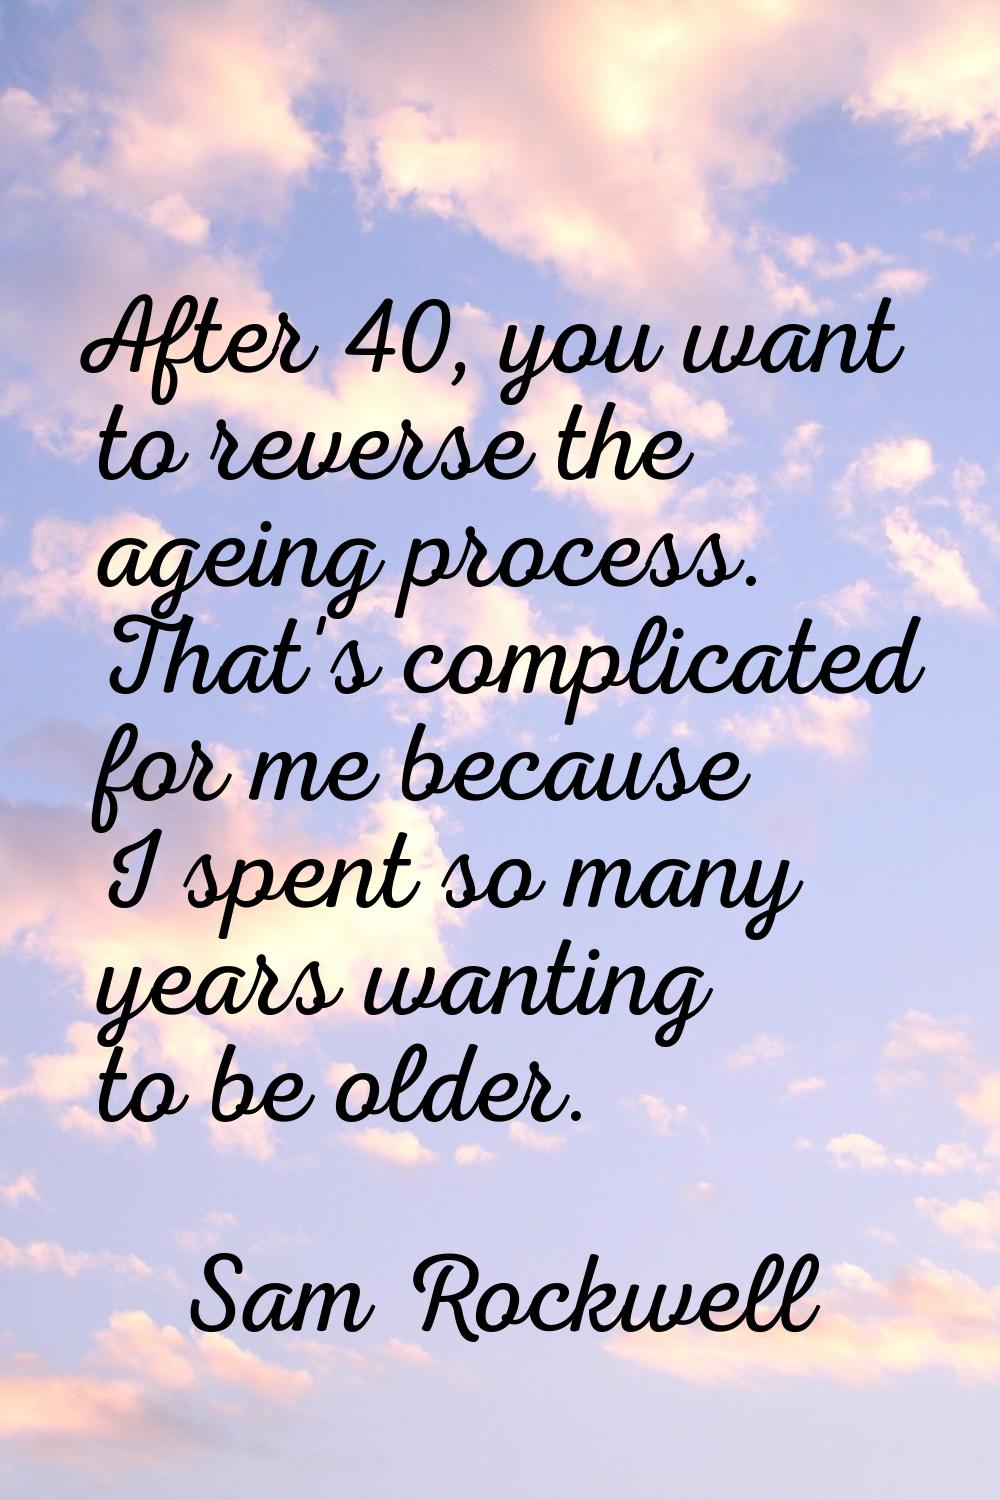 After 40, you want to reverse the ageing process. That's complicated for me because I spent so many